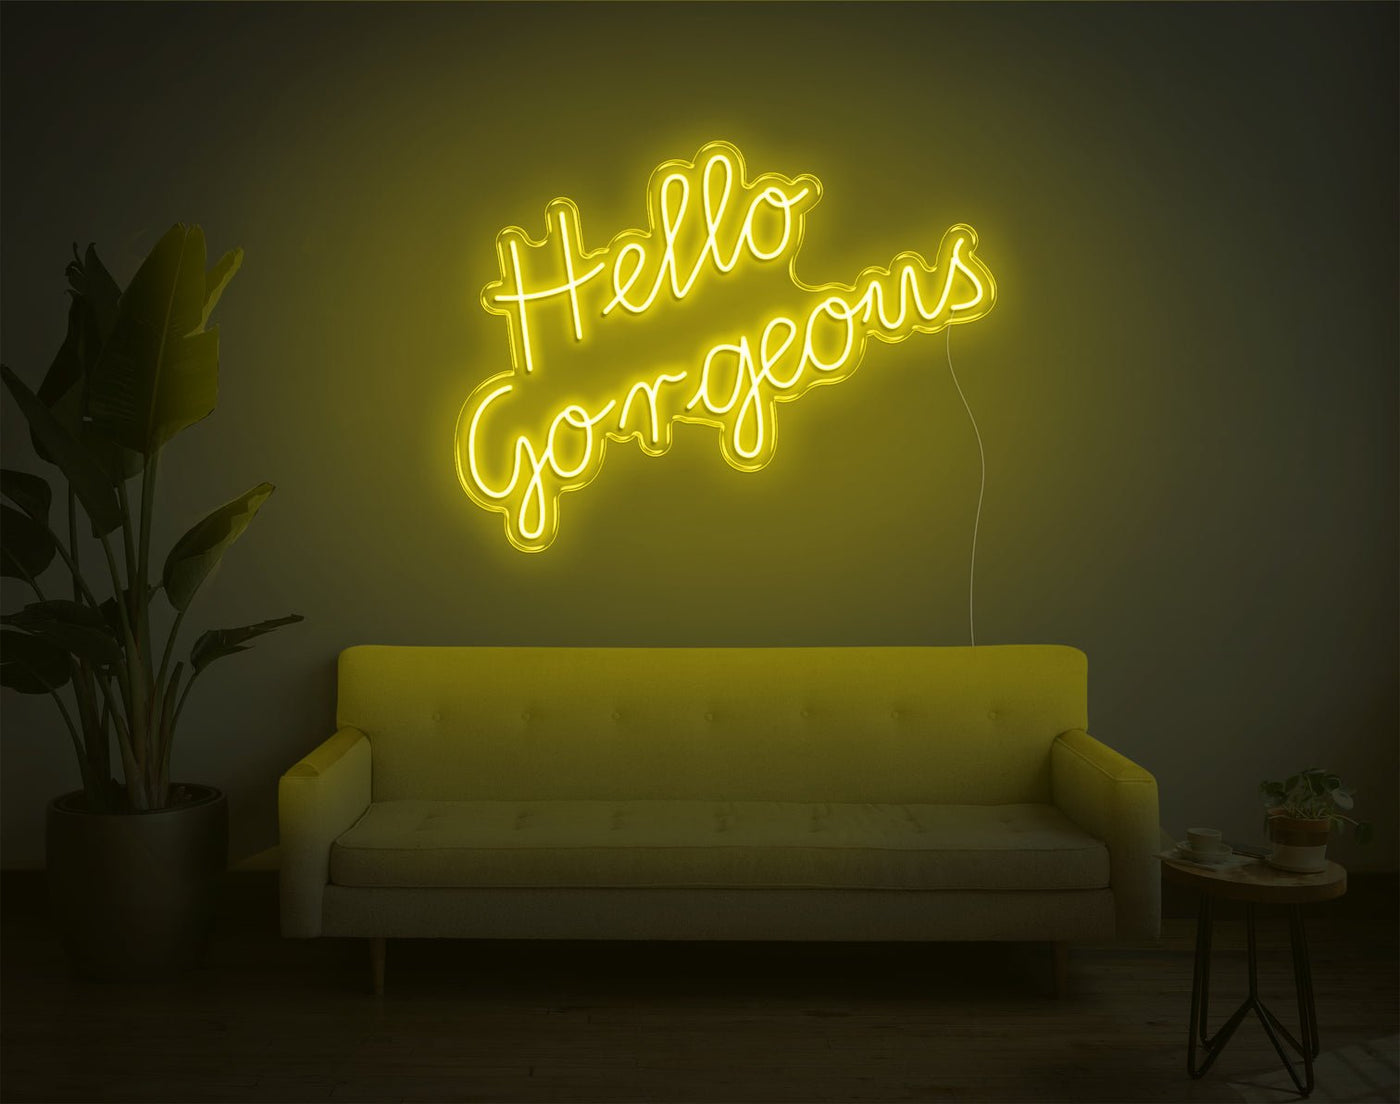 Hello Gorgeous LED Neon Sign - 22inch x 30inchHot Pink